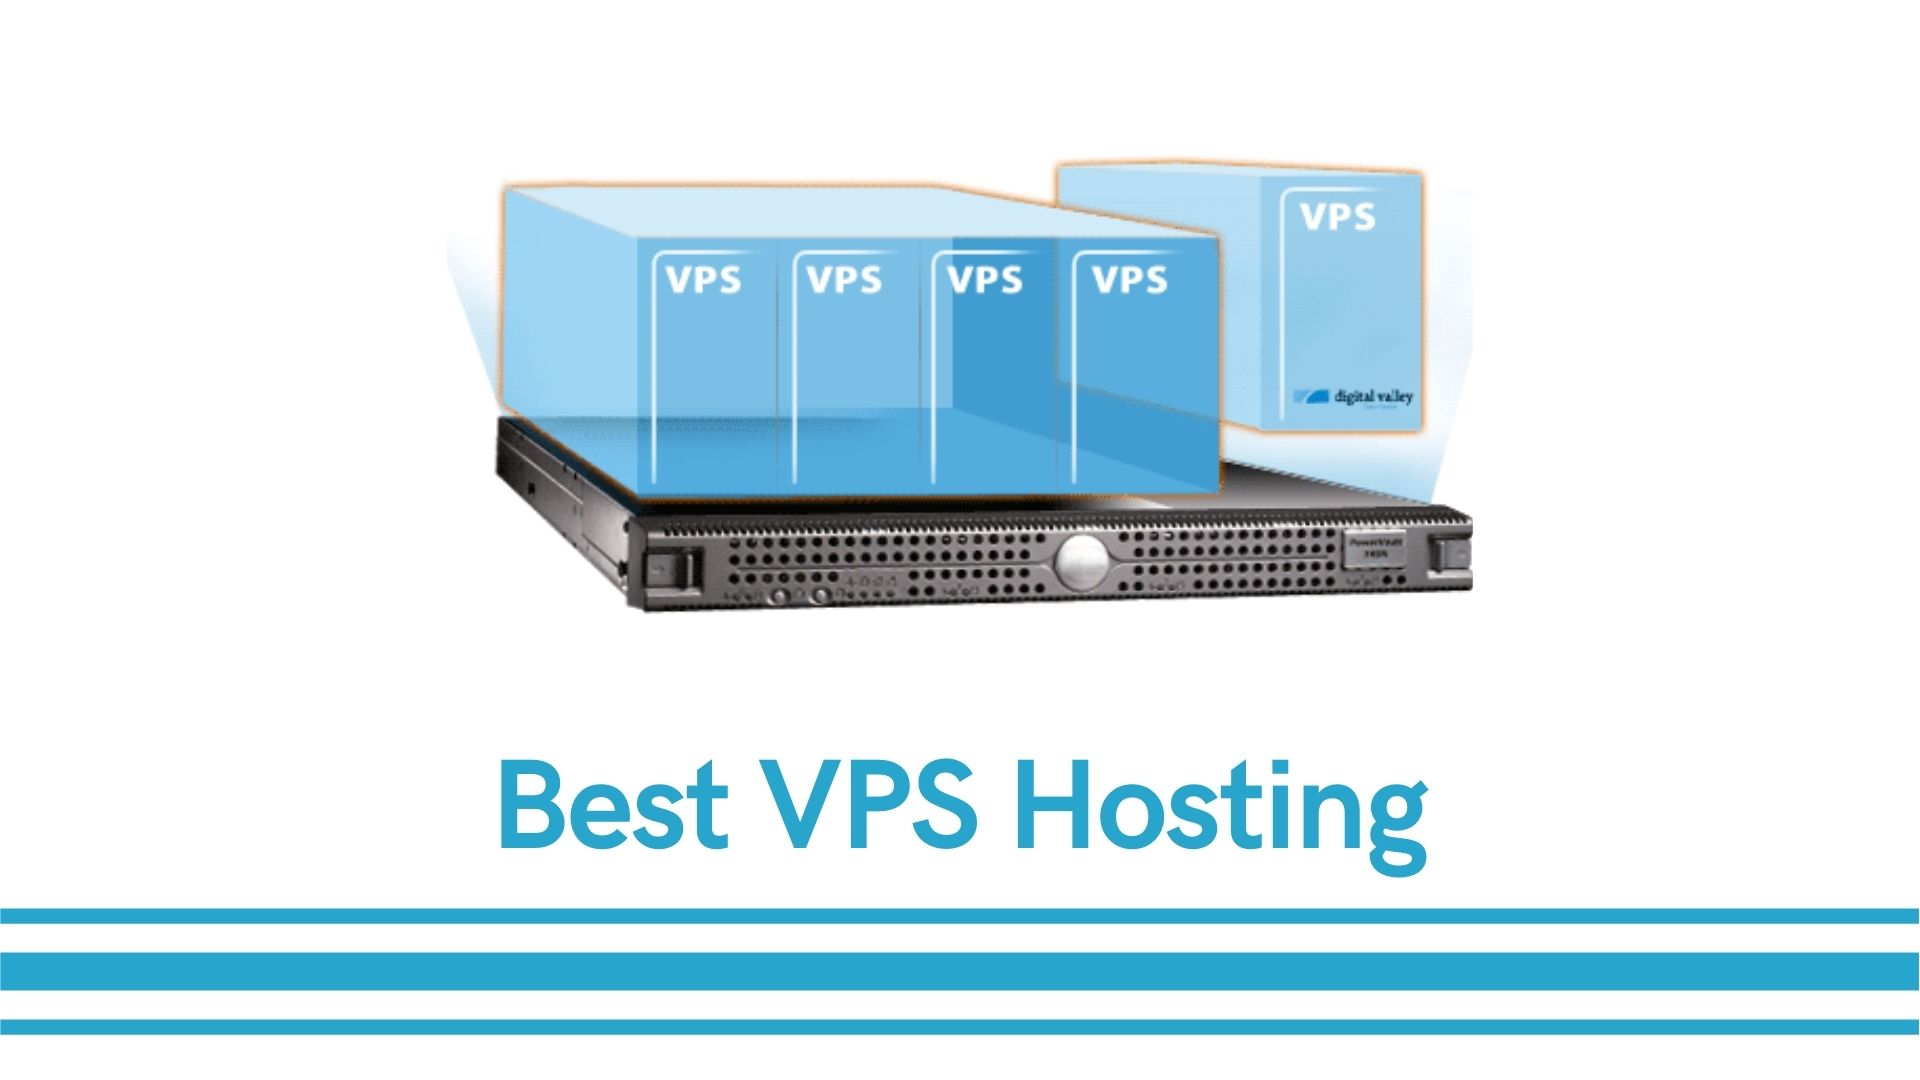 Top VPS Hosting Features